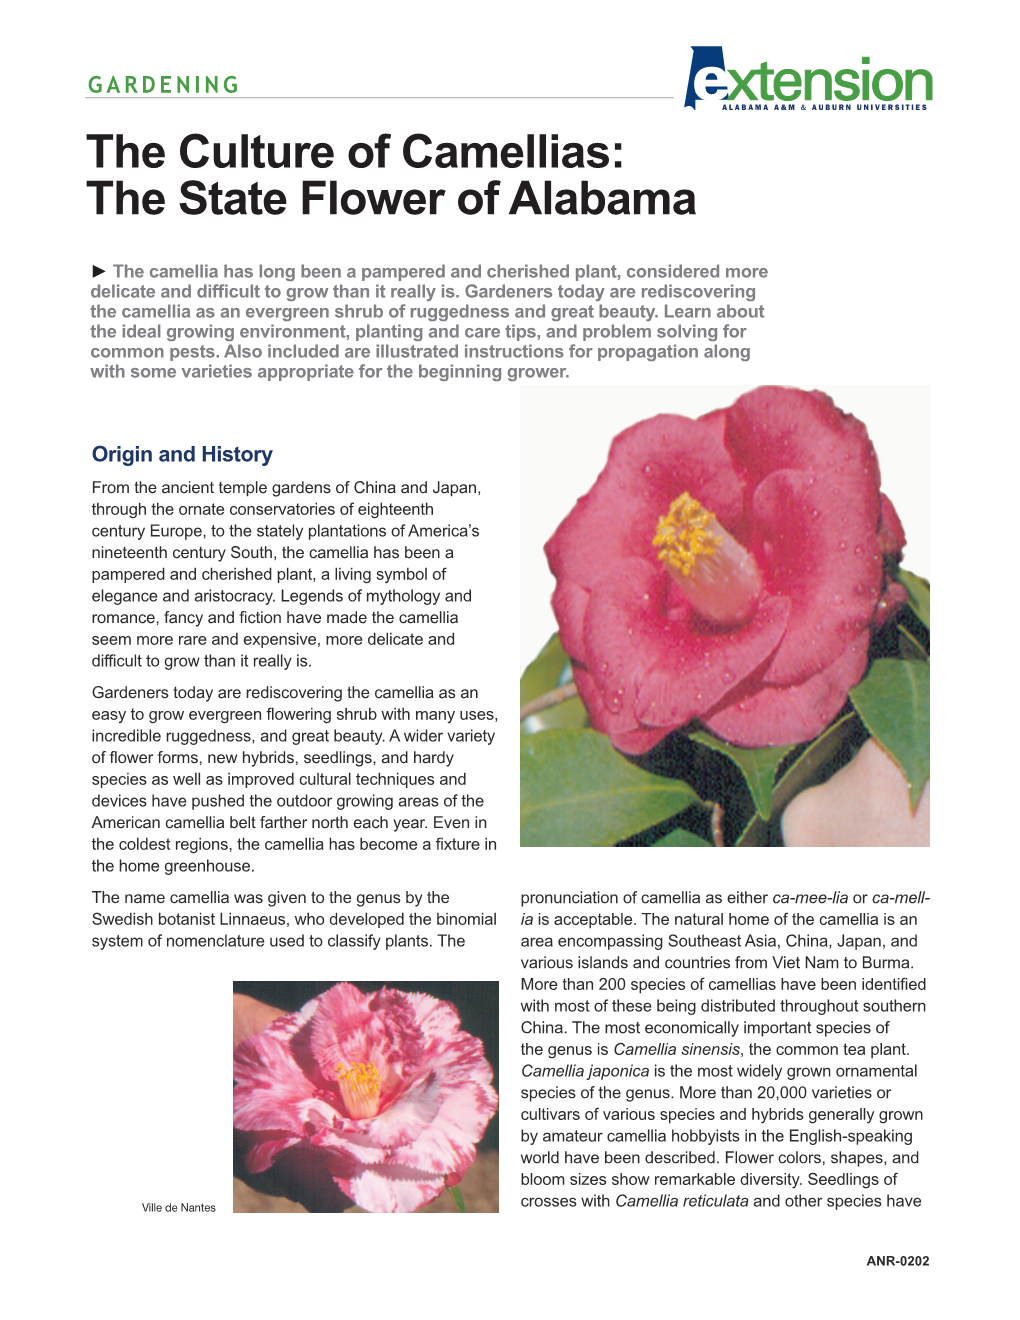 The Culture of Camellias: the State Flower of Alabama